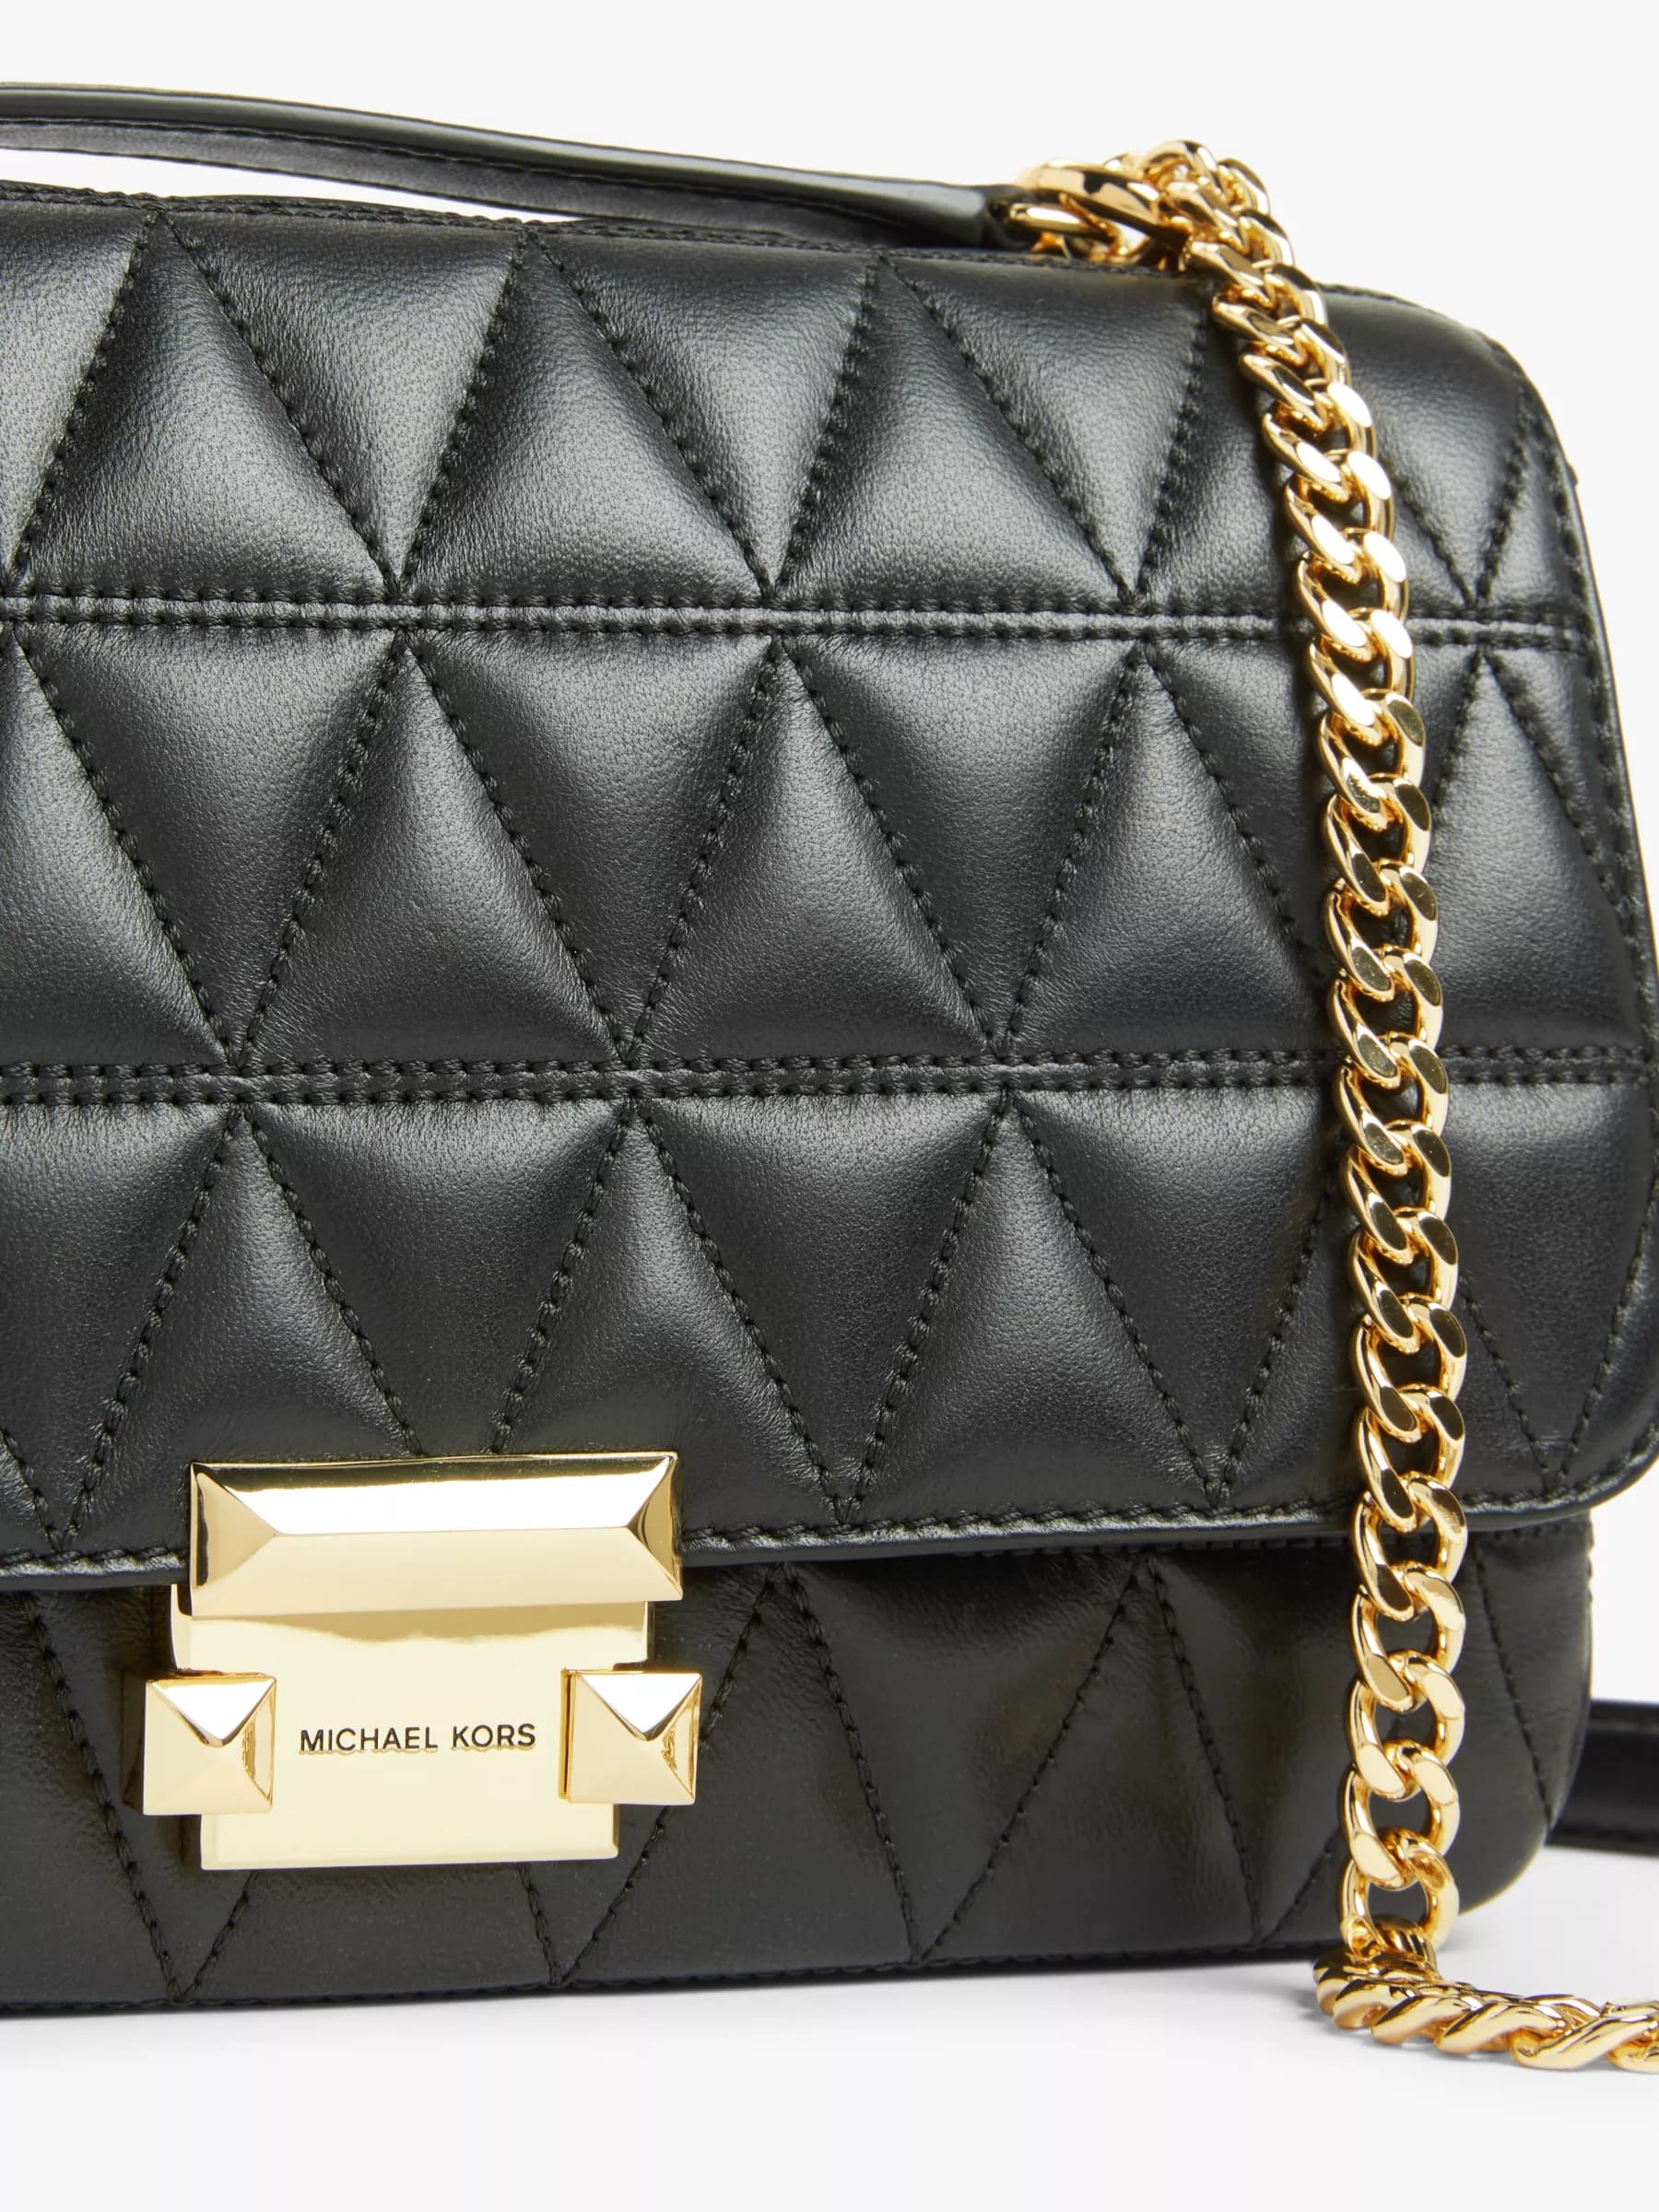 TÚI XÁCH NỮ MICHAEL KORS SLOAN LARGE QUILTED LEATHER SHOULDER BAG 8